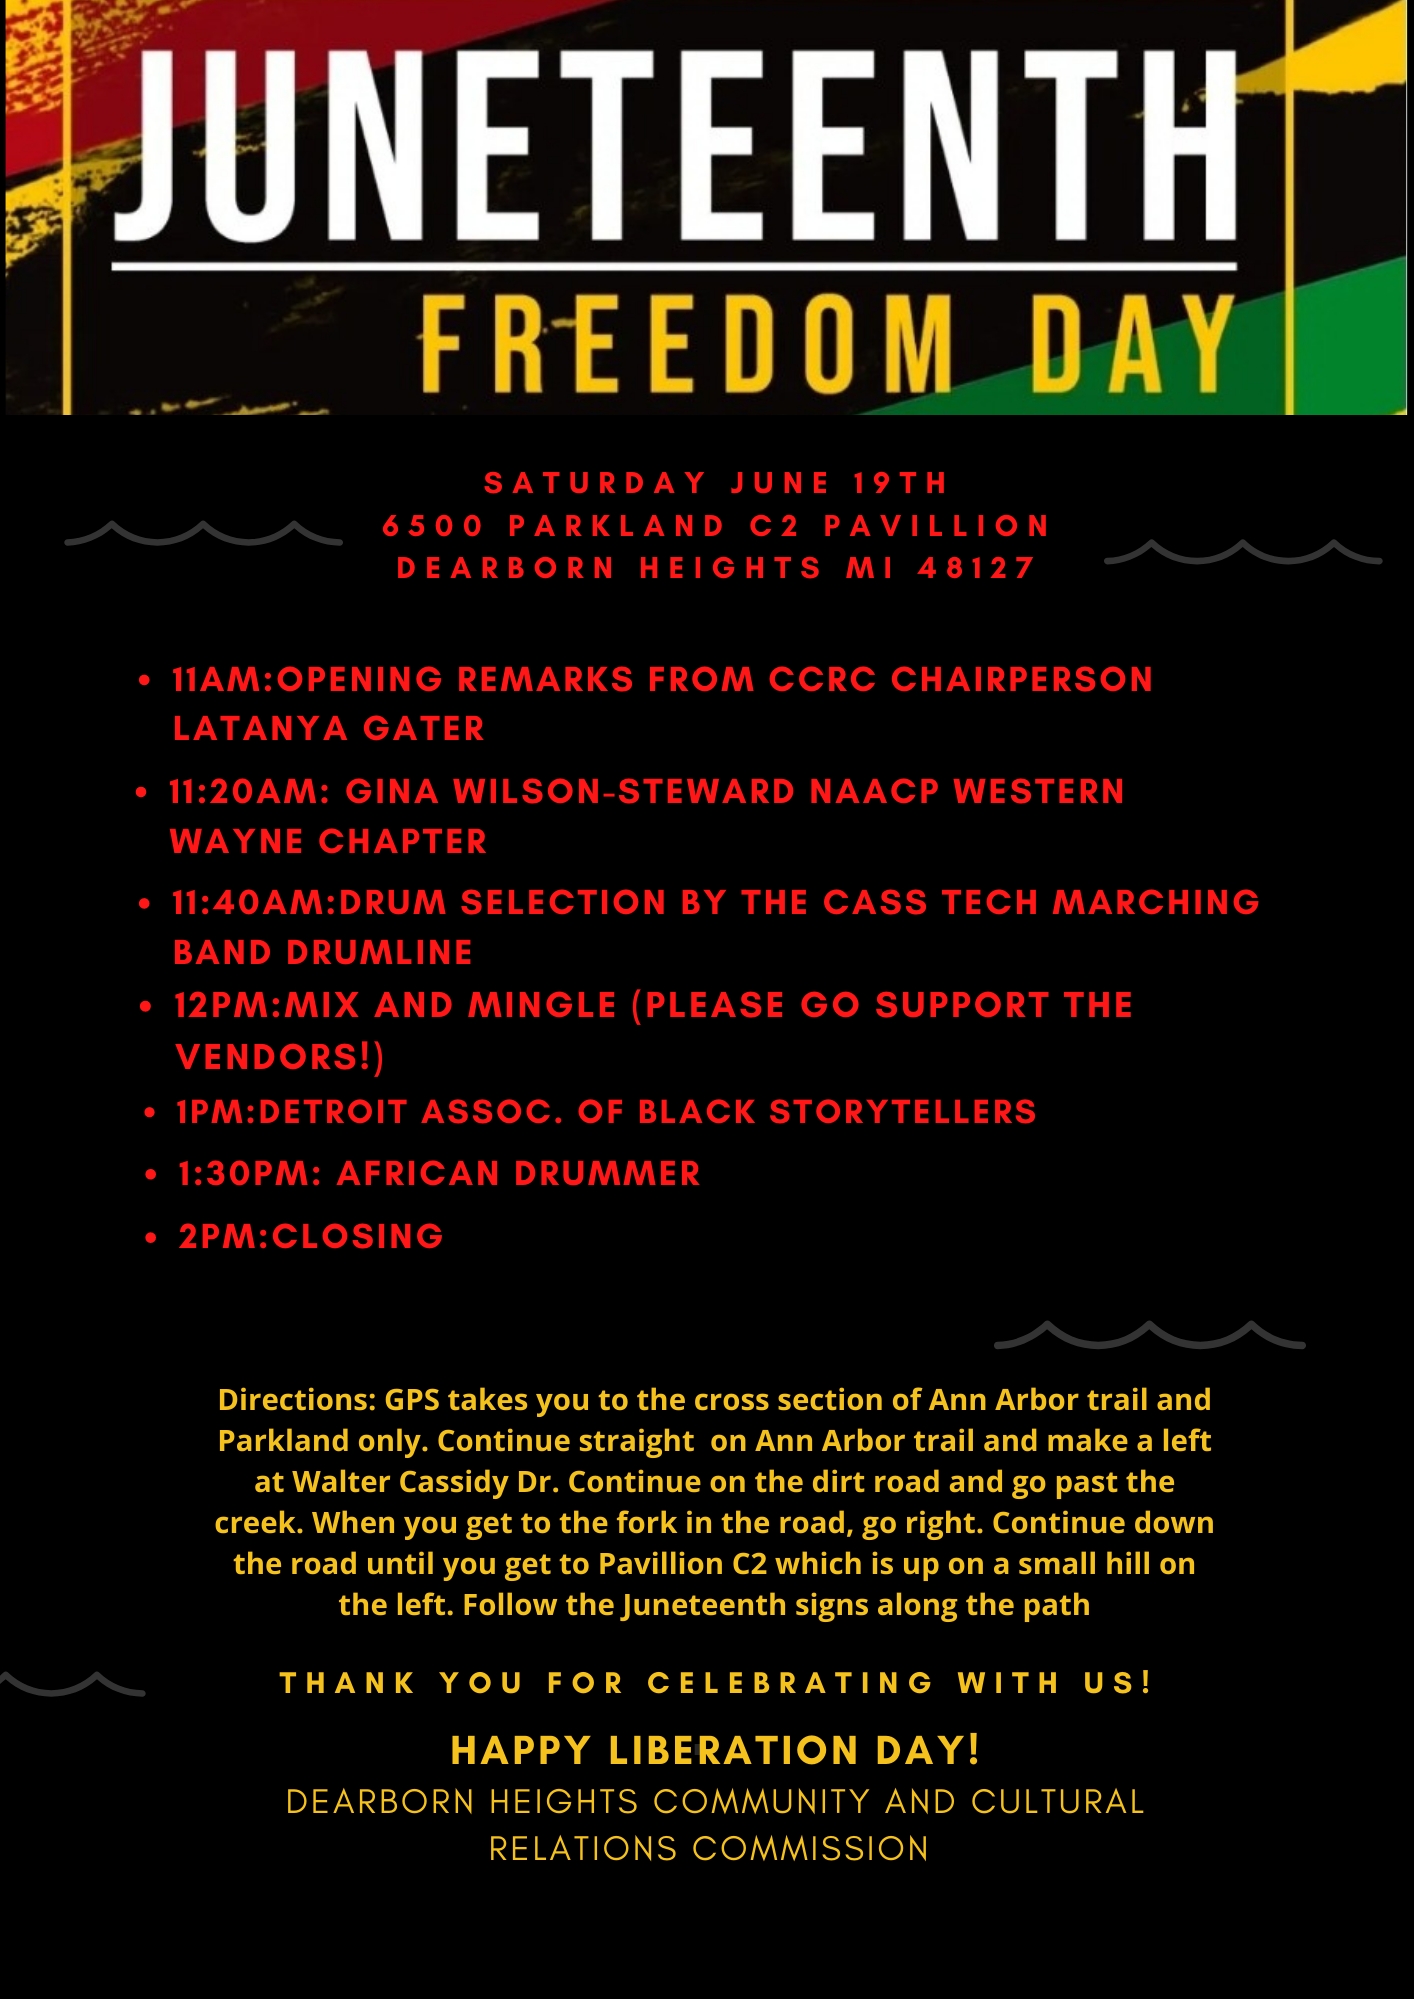 Freedom Day flyer image